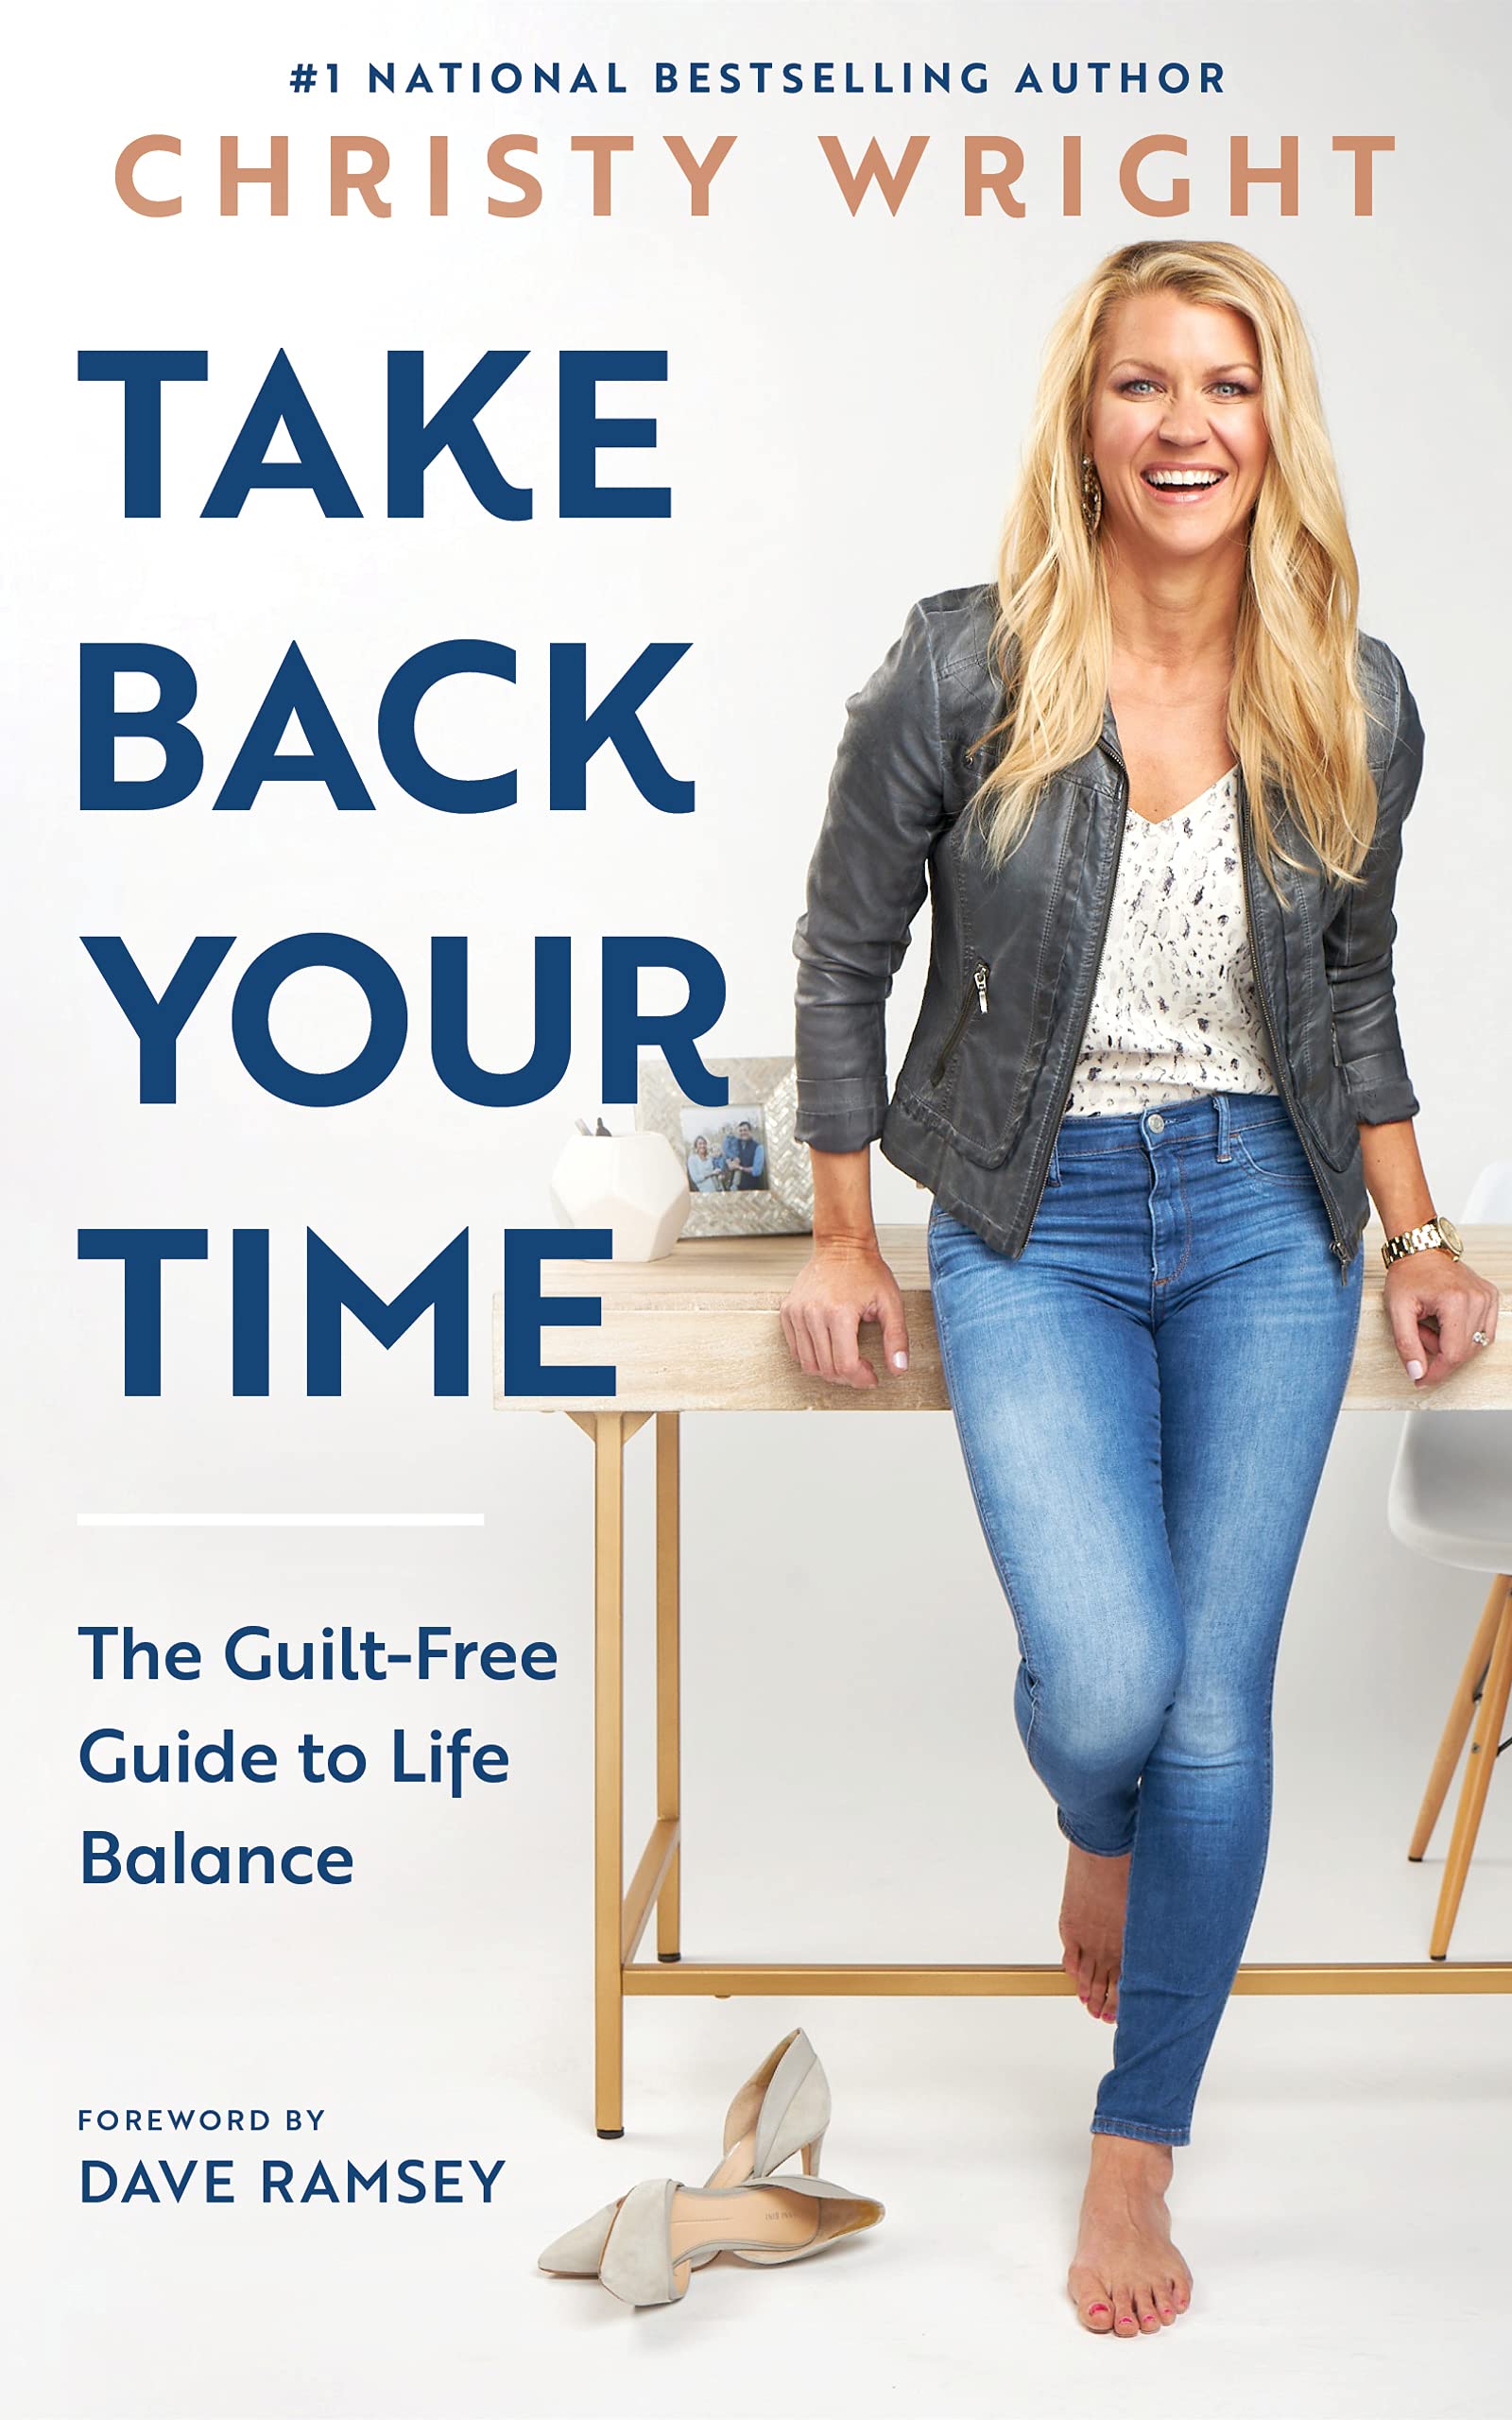 You are currently viewing Take Back Your Time: The Guilt-Free Guide to Life Balance by Christy Wright